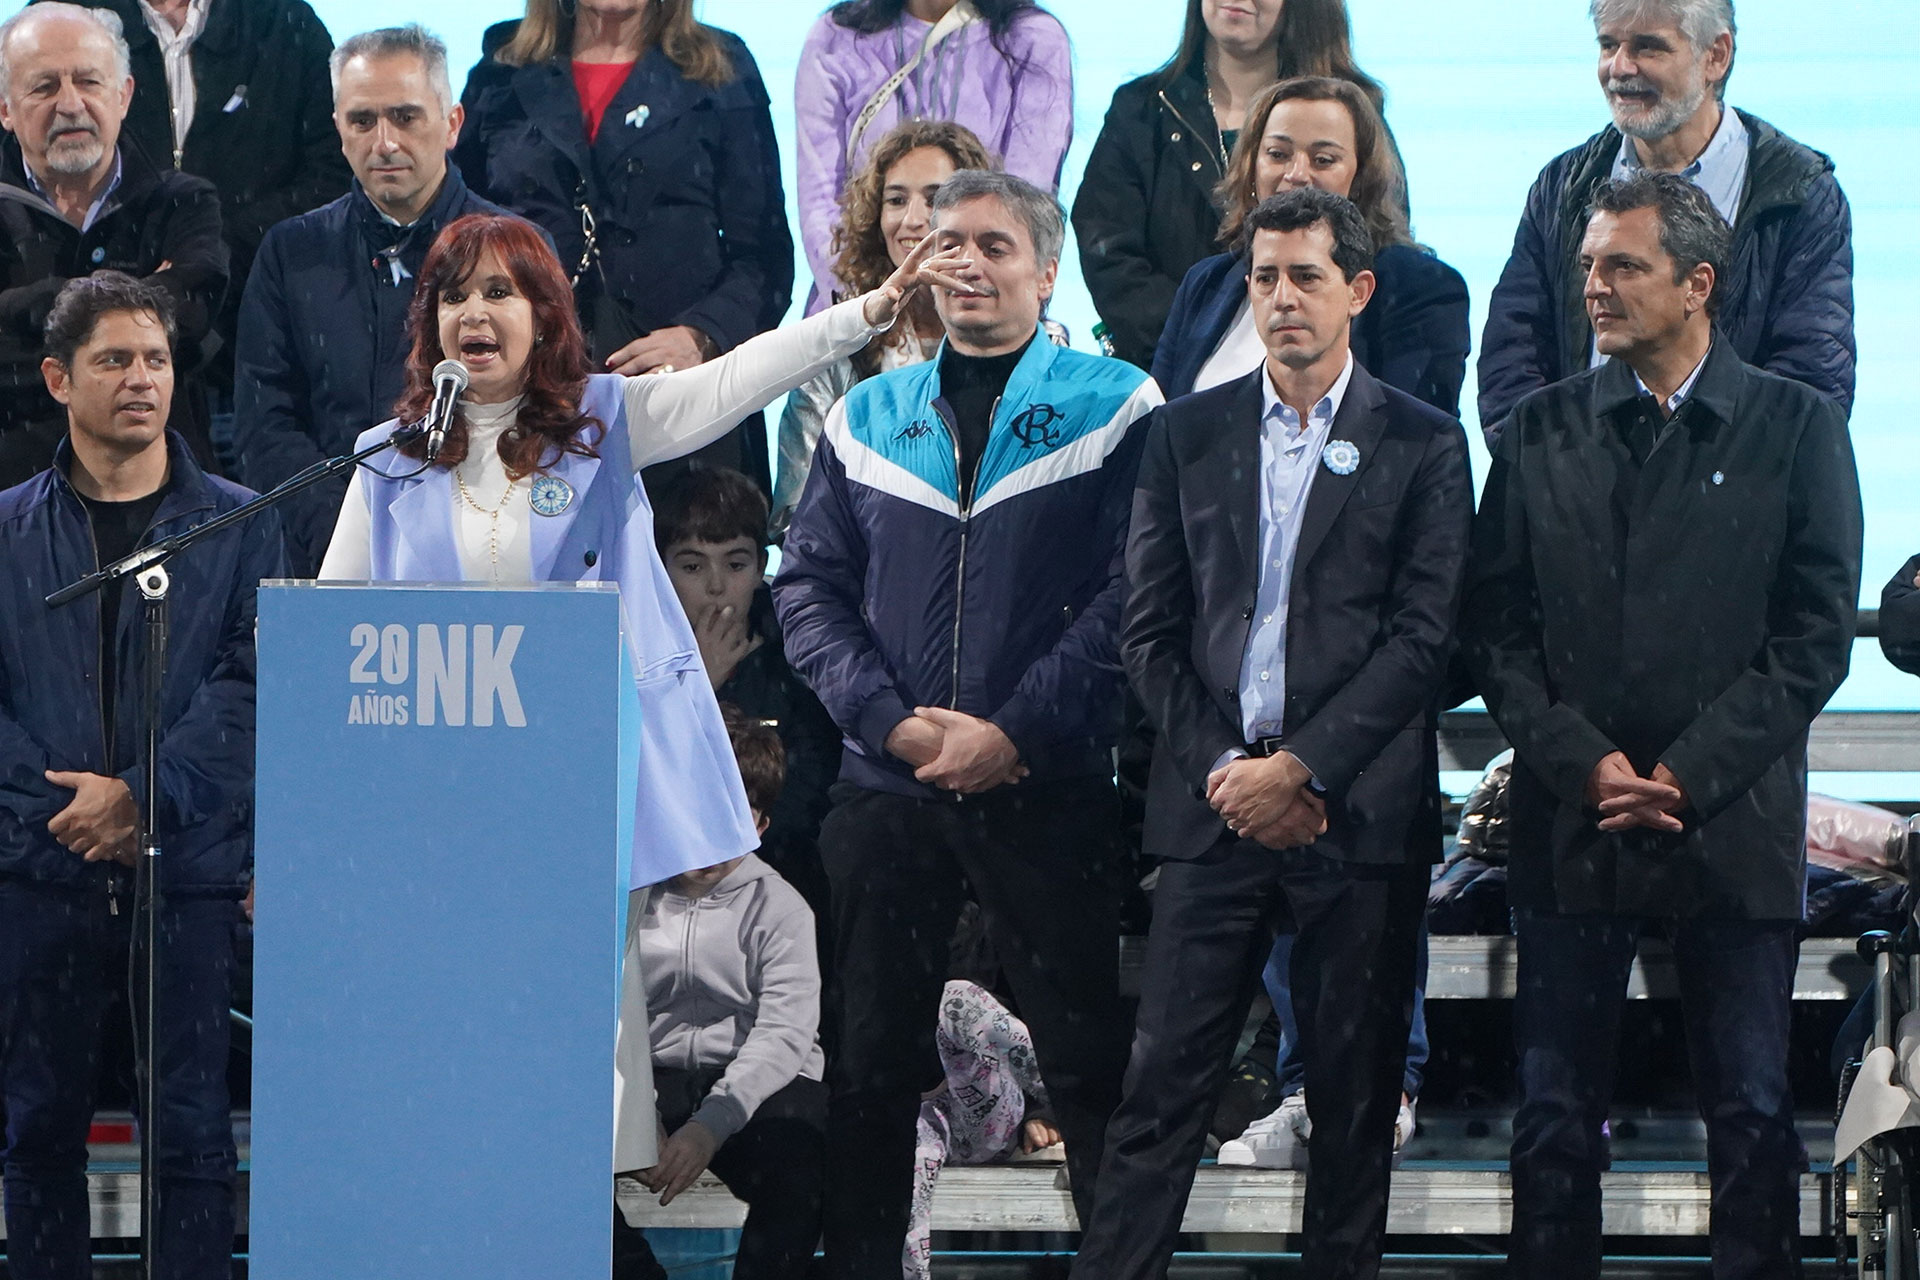 De Pedro was one of the leaders privileged by CFK on the scene last Thursday (Franco Fafasuli)